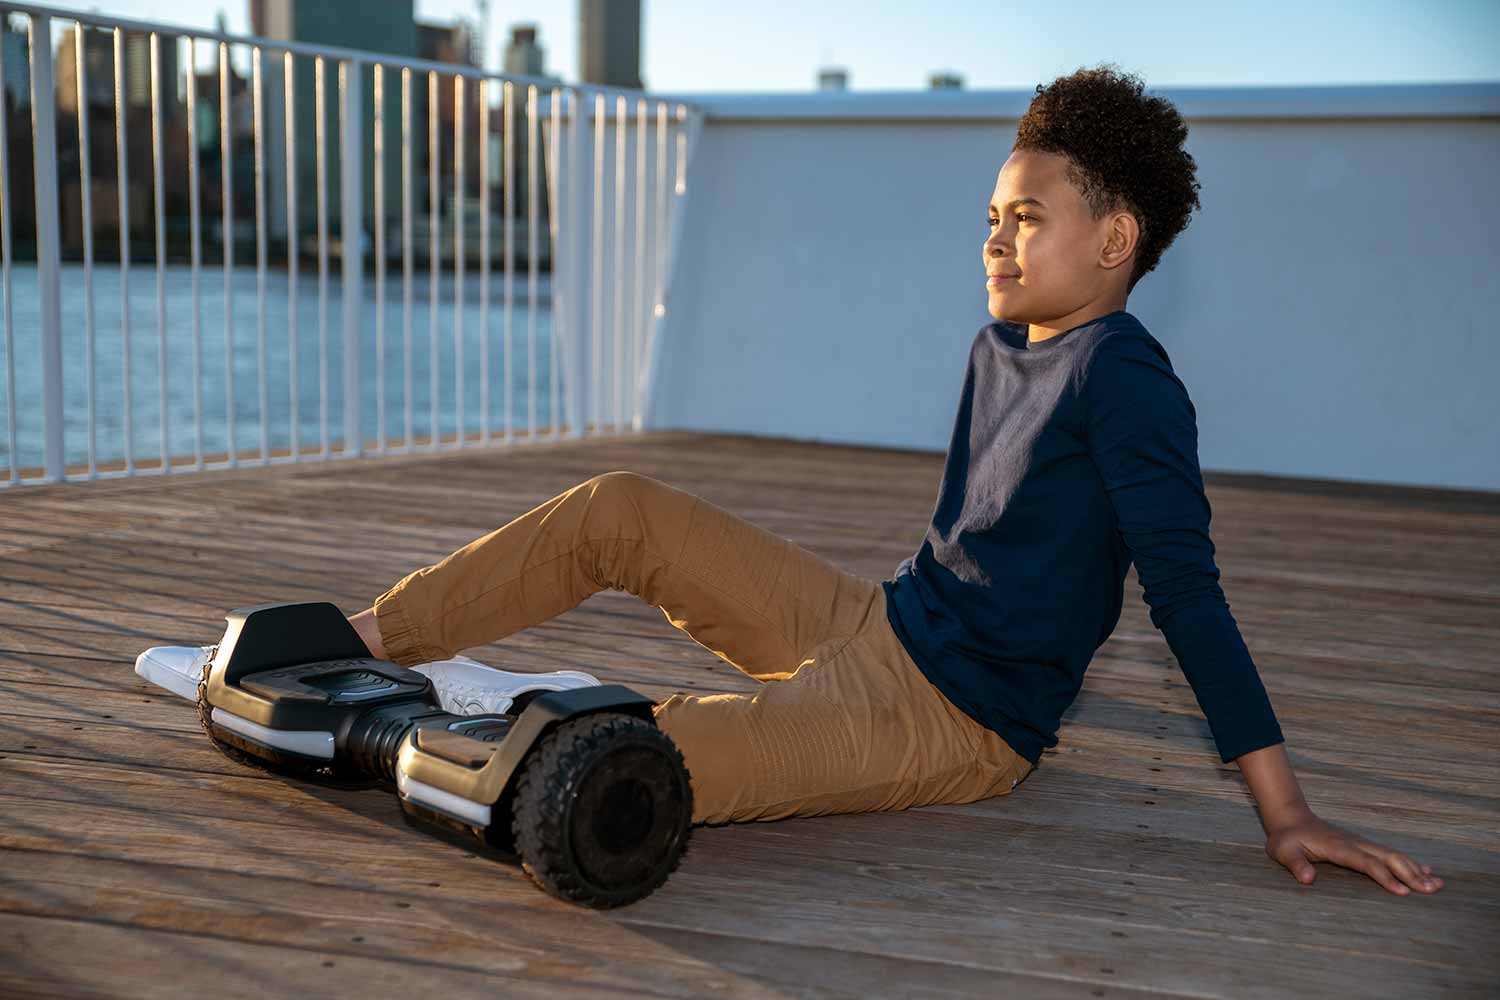 Ride A Hoverboard This Summer